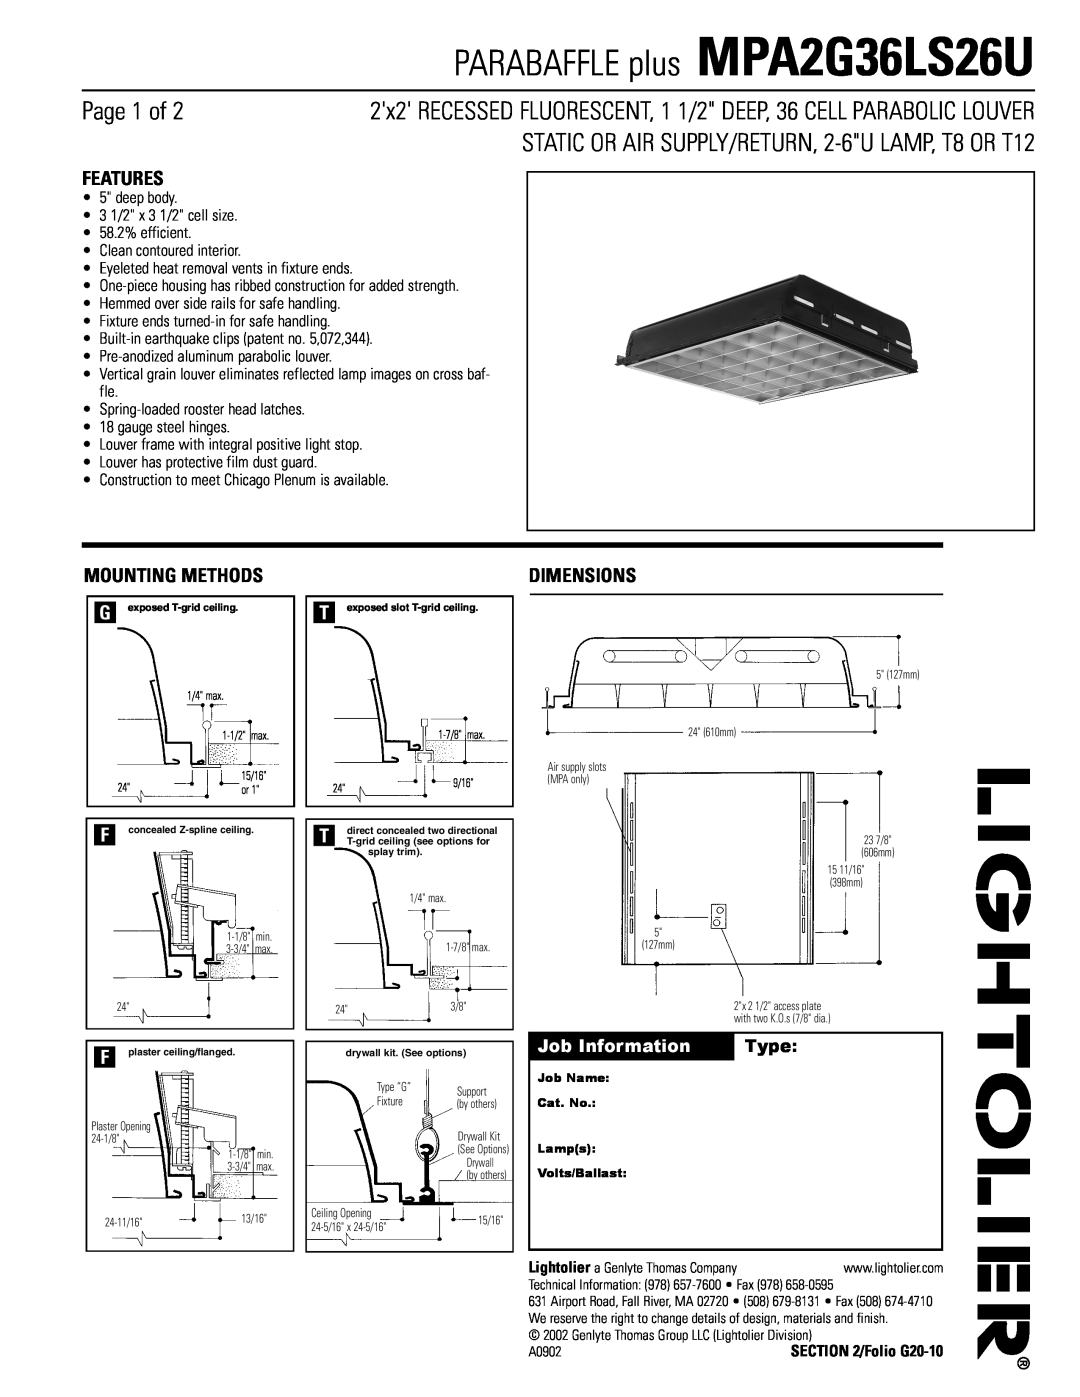 Lightolier MPA2G36LS26U dimensions Page 1 of, Features, Mounting Methods, Dimensions, Job Information, Type 